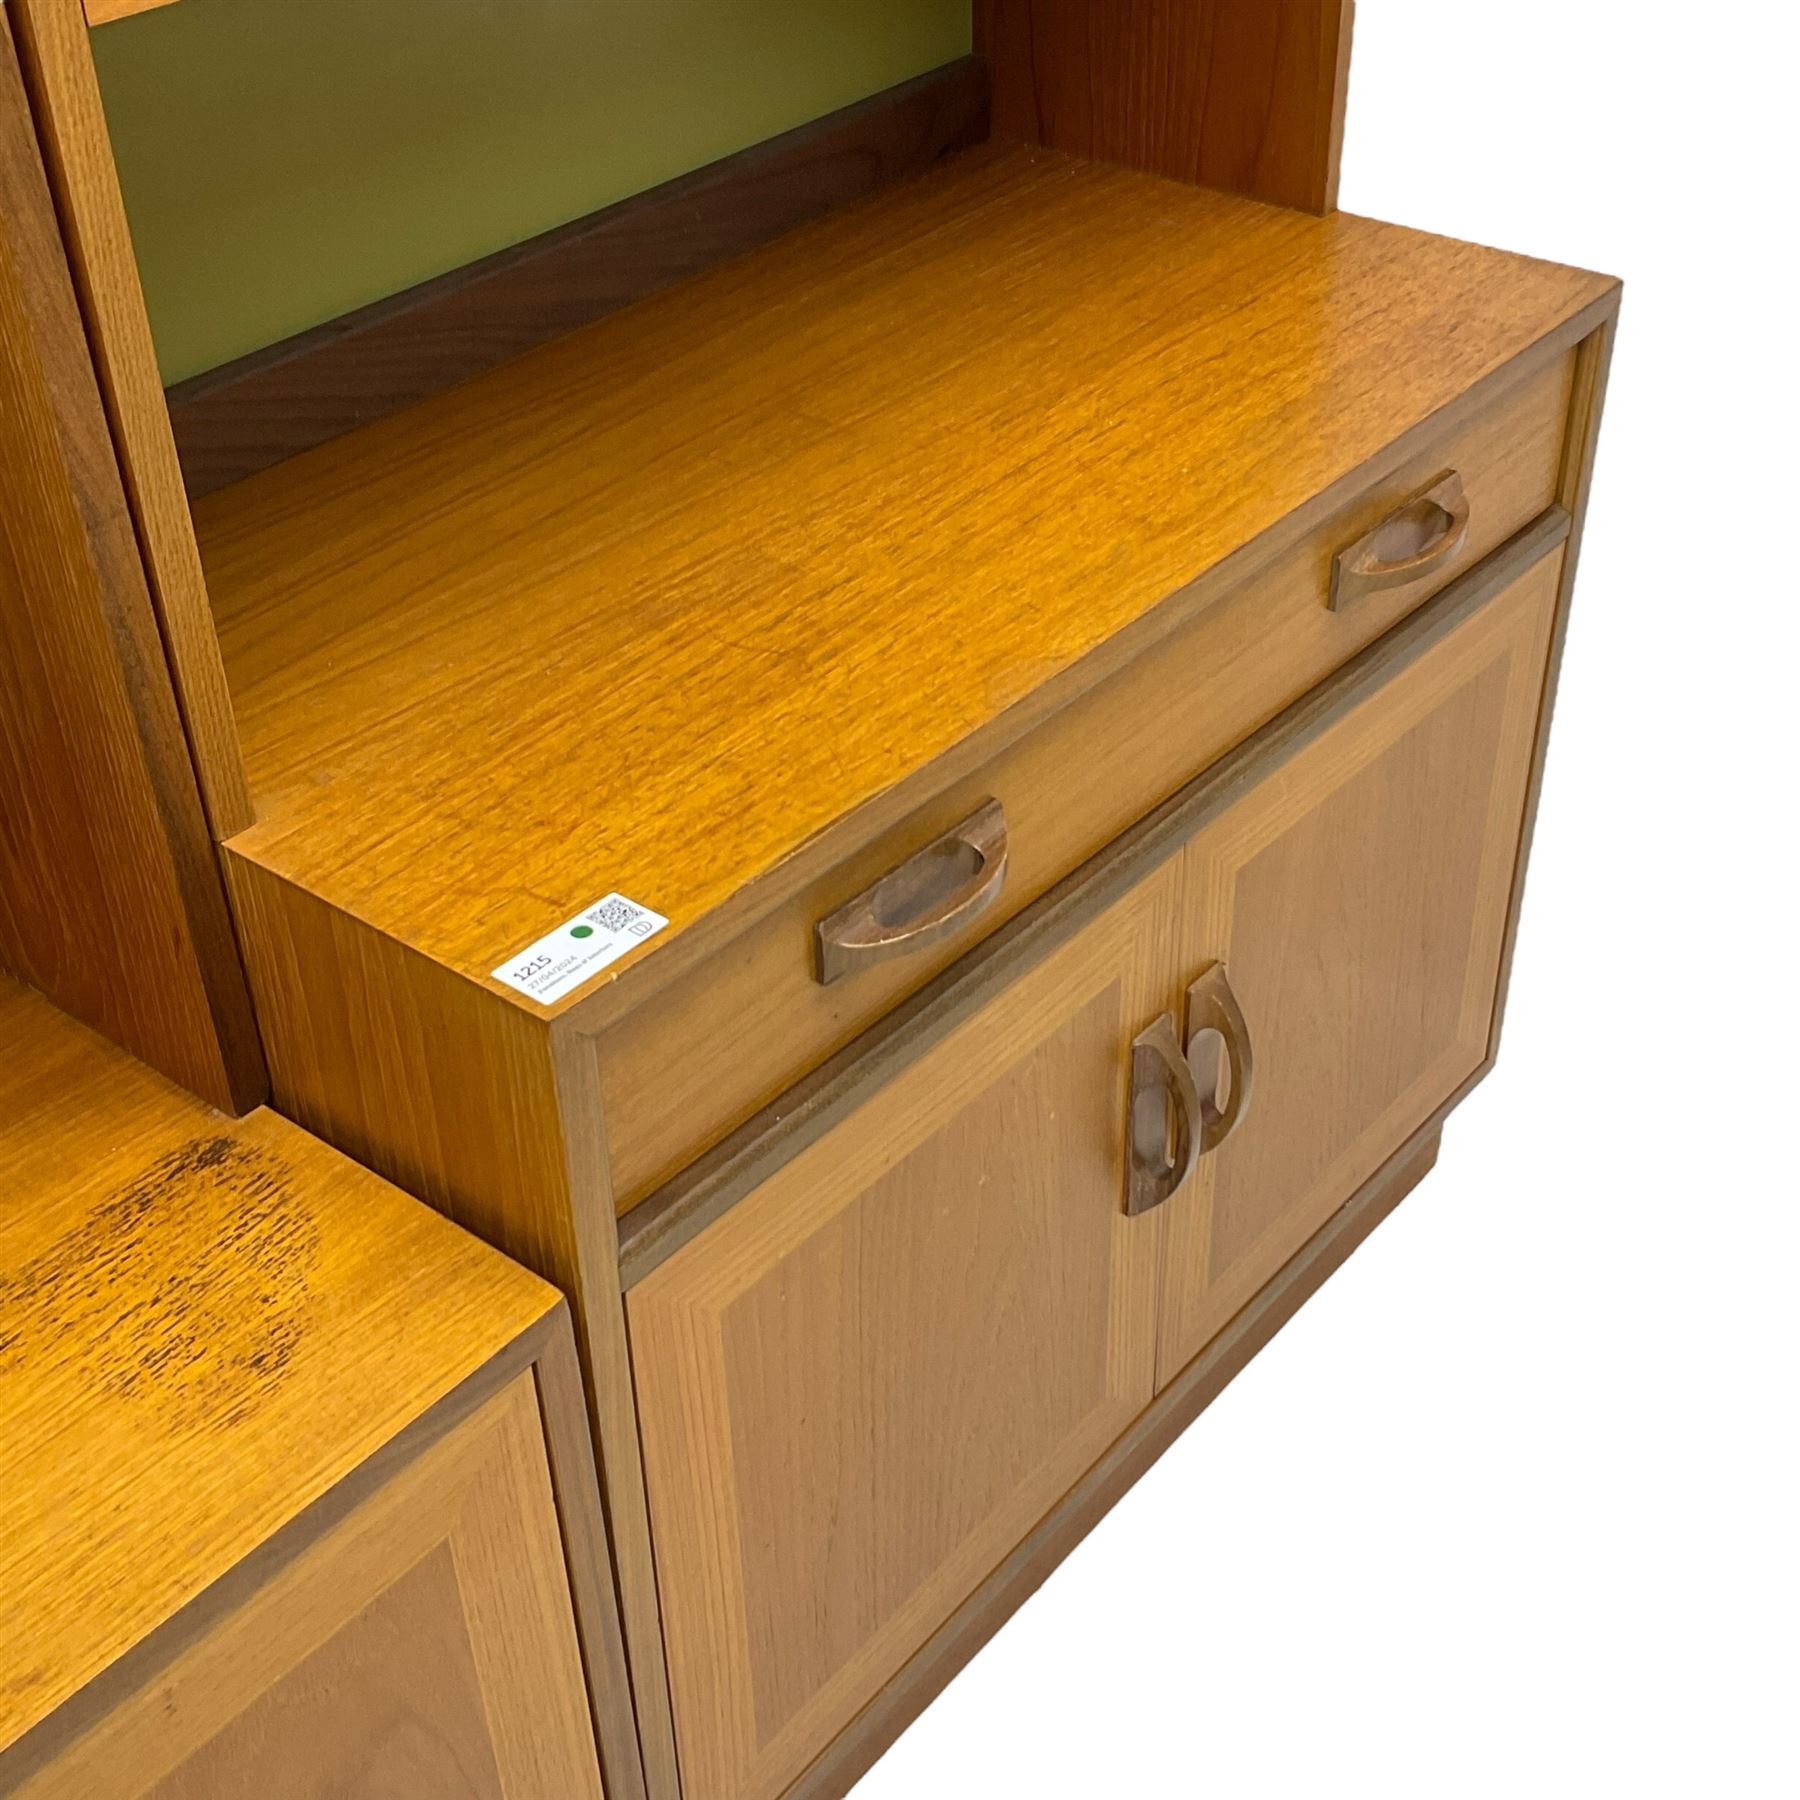 G-Plan - mid-20th century teak sectional wall unit - Image 5 of 6